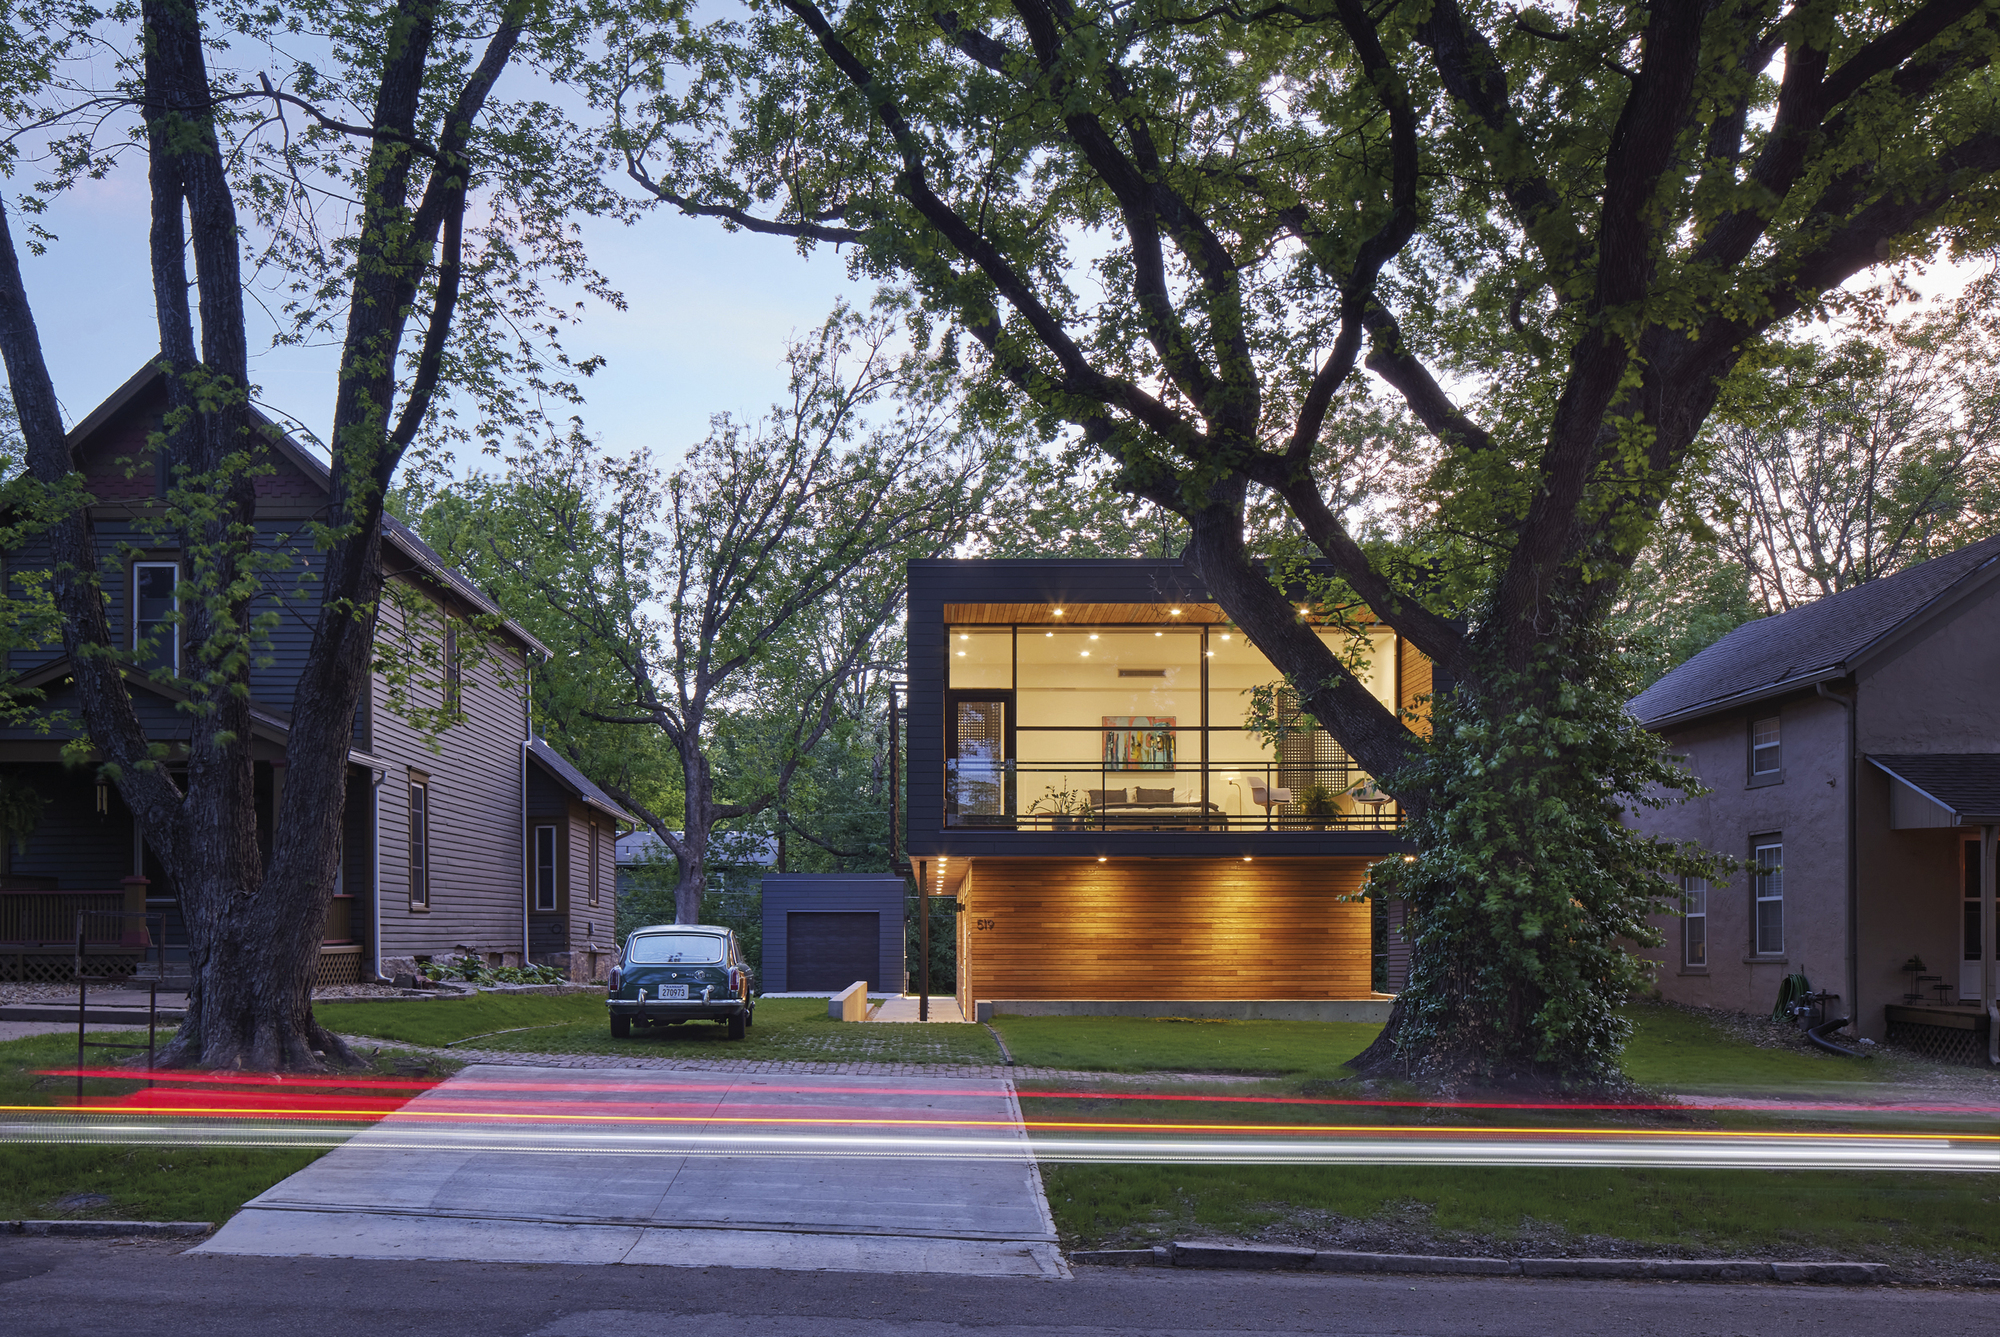 House Architecture Parking Lot Facade Street Trees 2000x1337